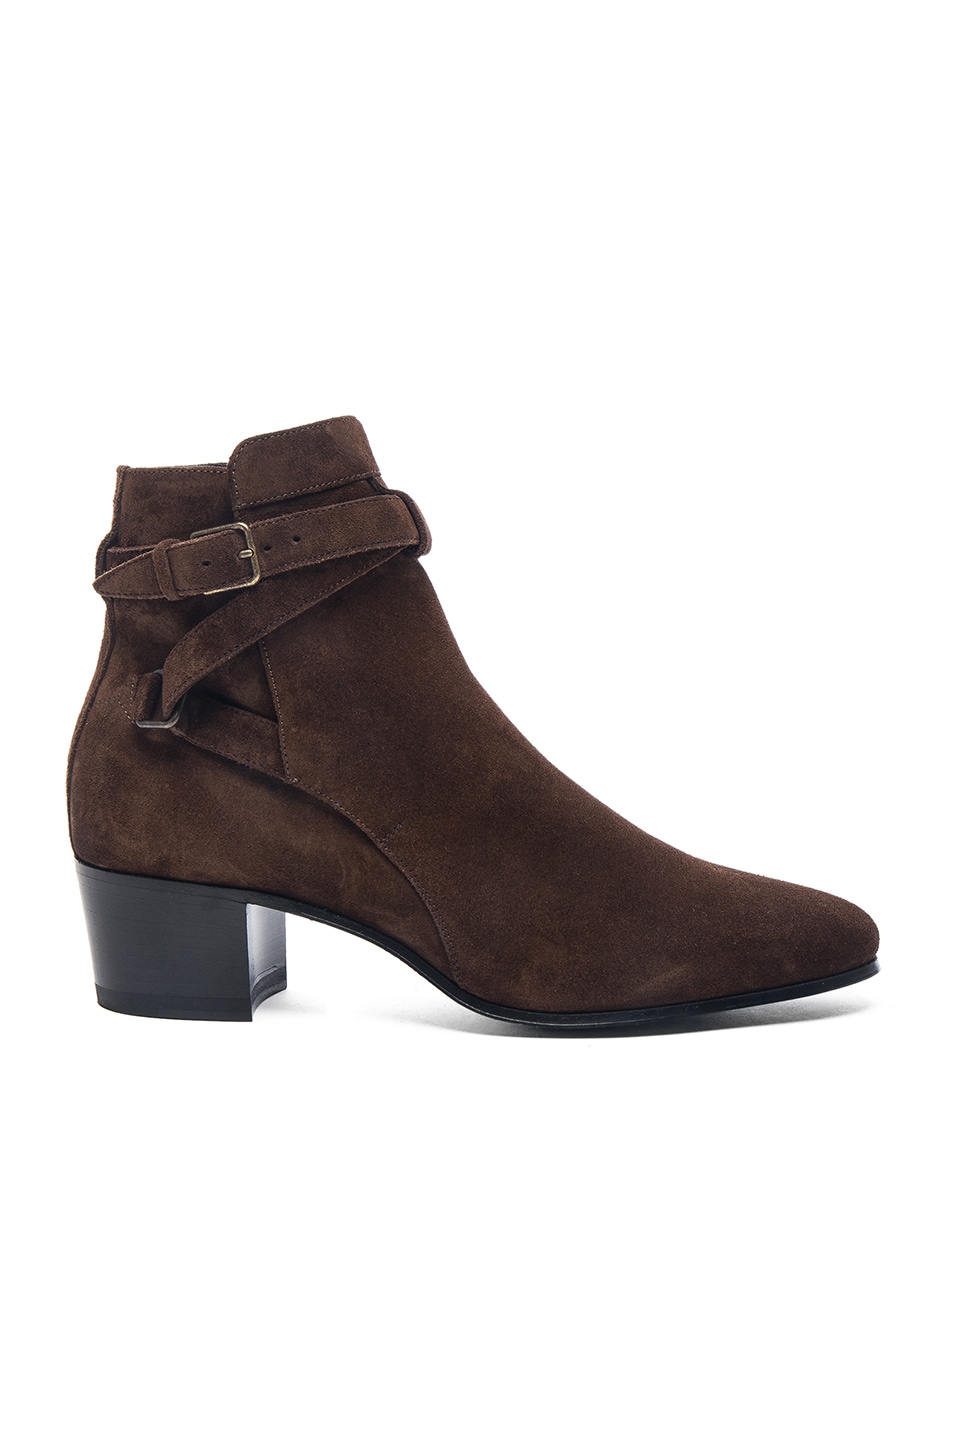 Image 1 of Saint Laurent Suede Blake Buckle Boots in Cafe